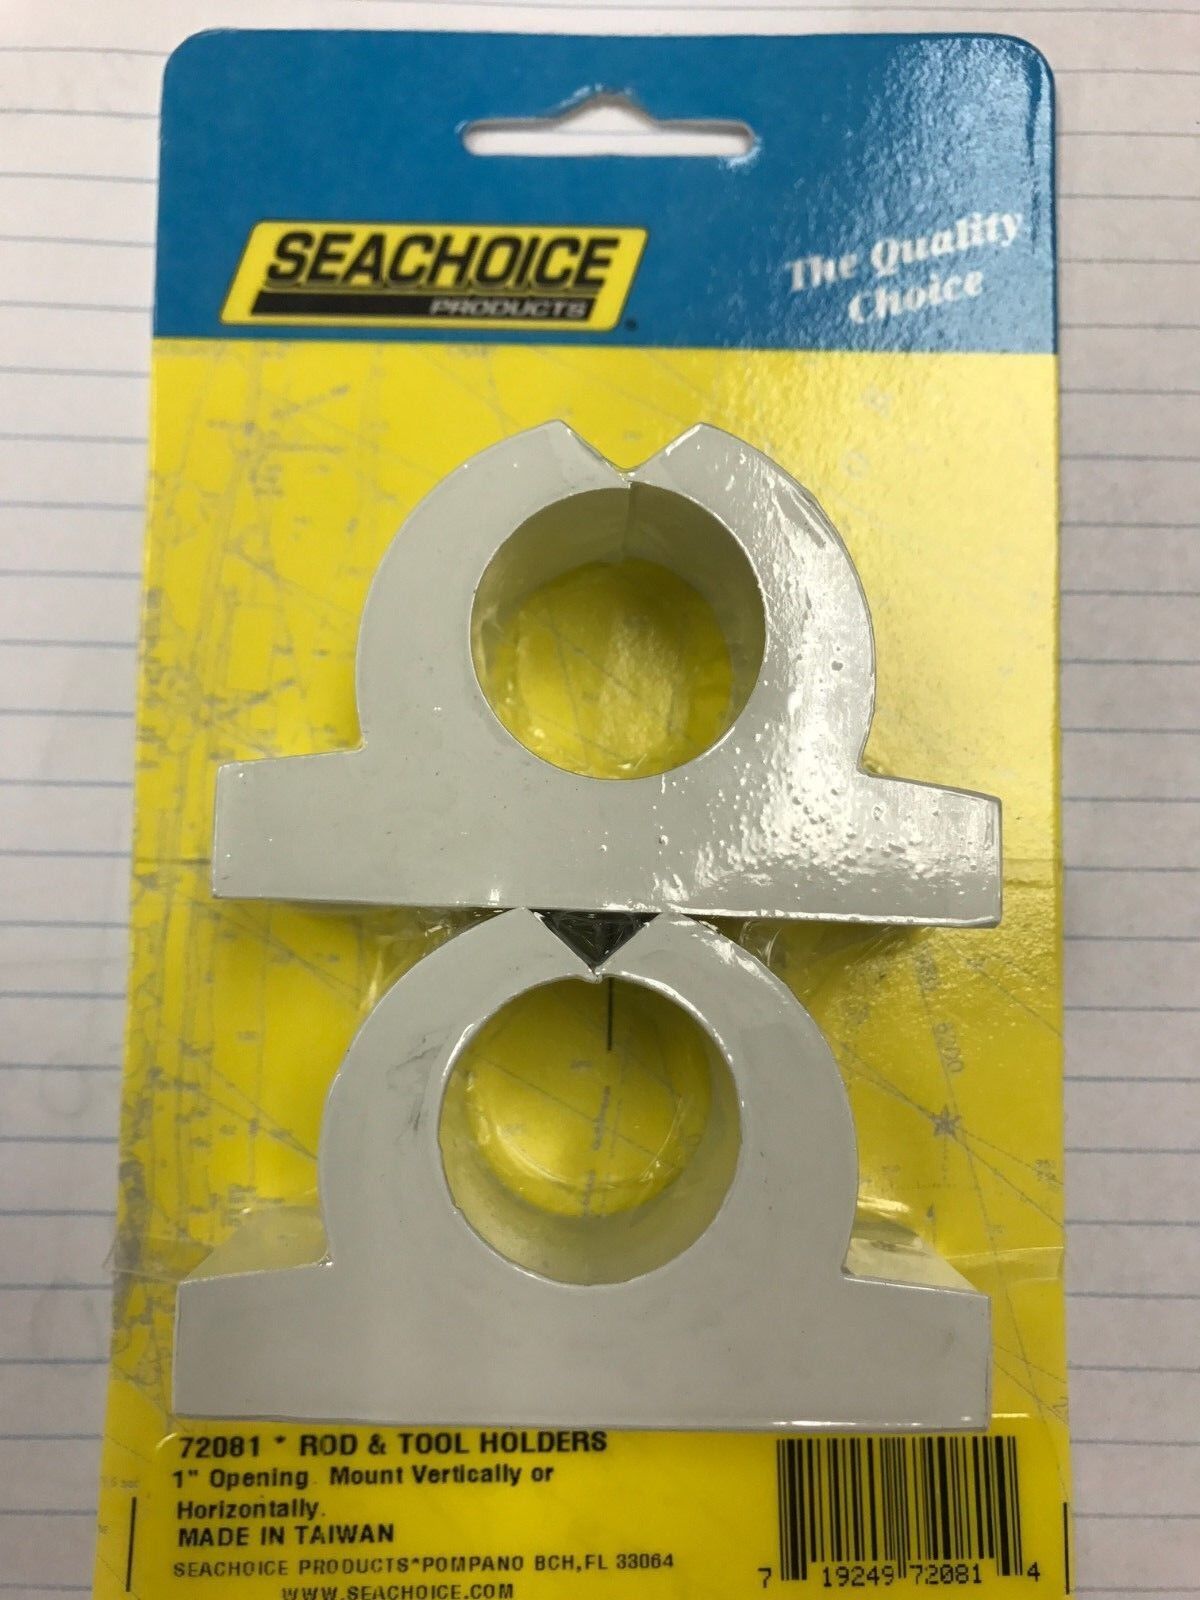 CLAMP ON FISHING ROD HOLDER SEACHOICE 89151 STAINLESS BOATINGMALL